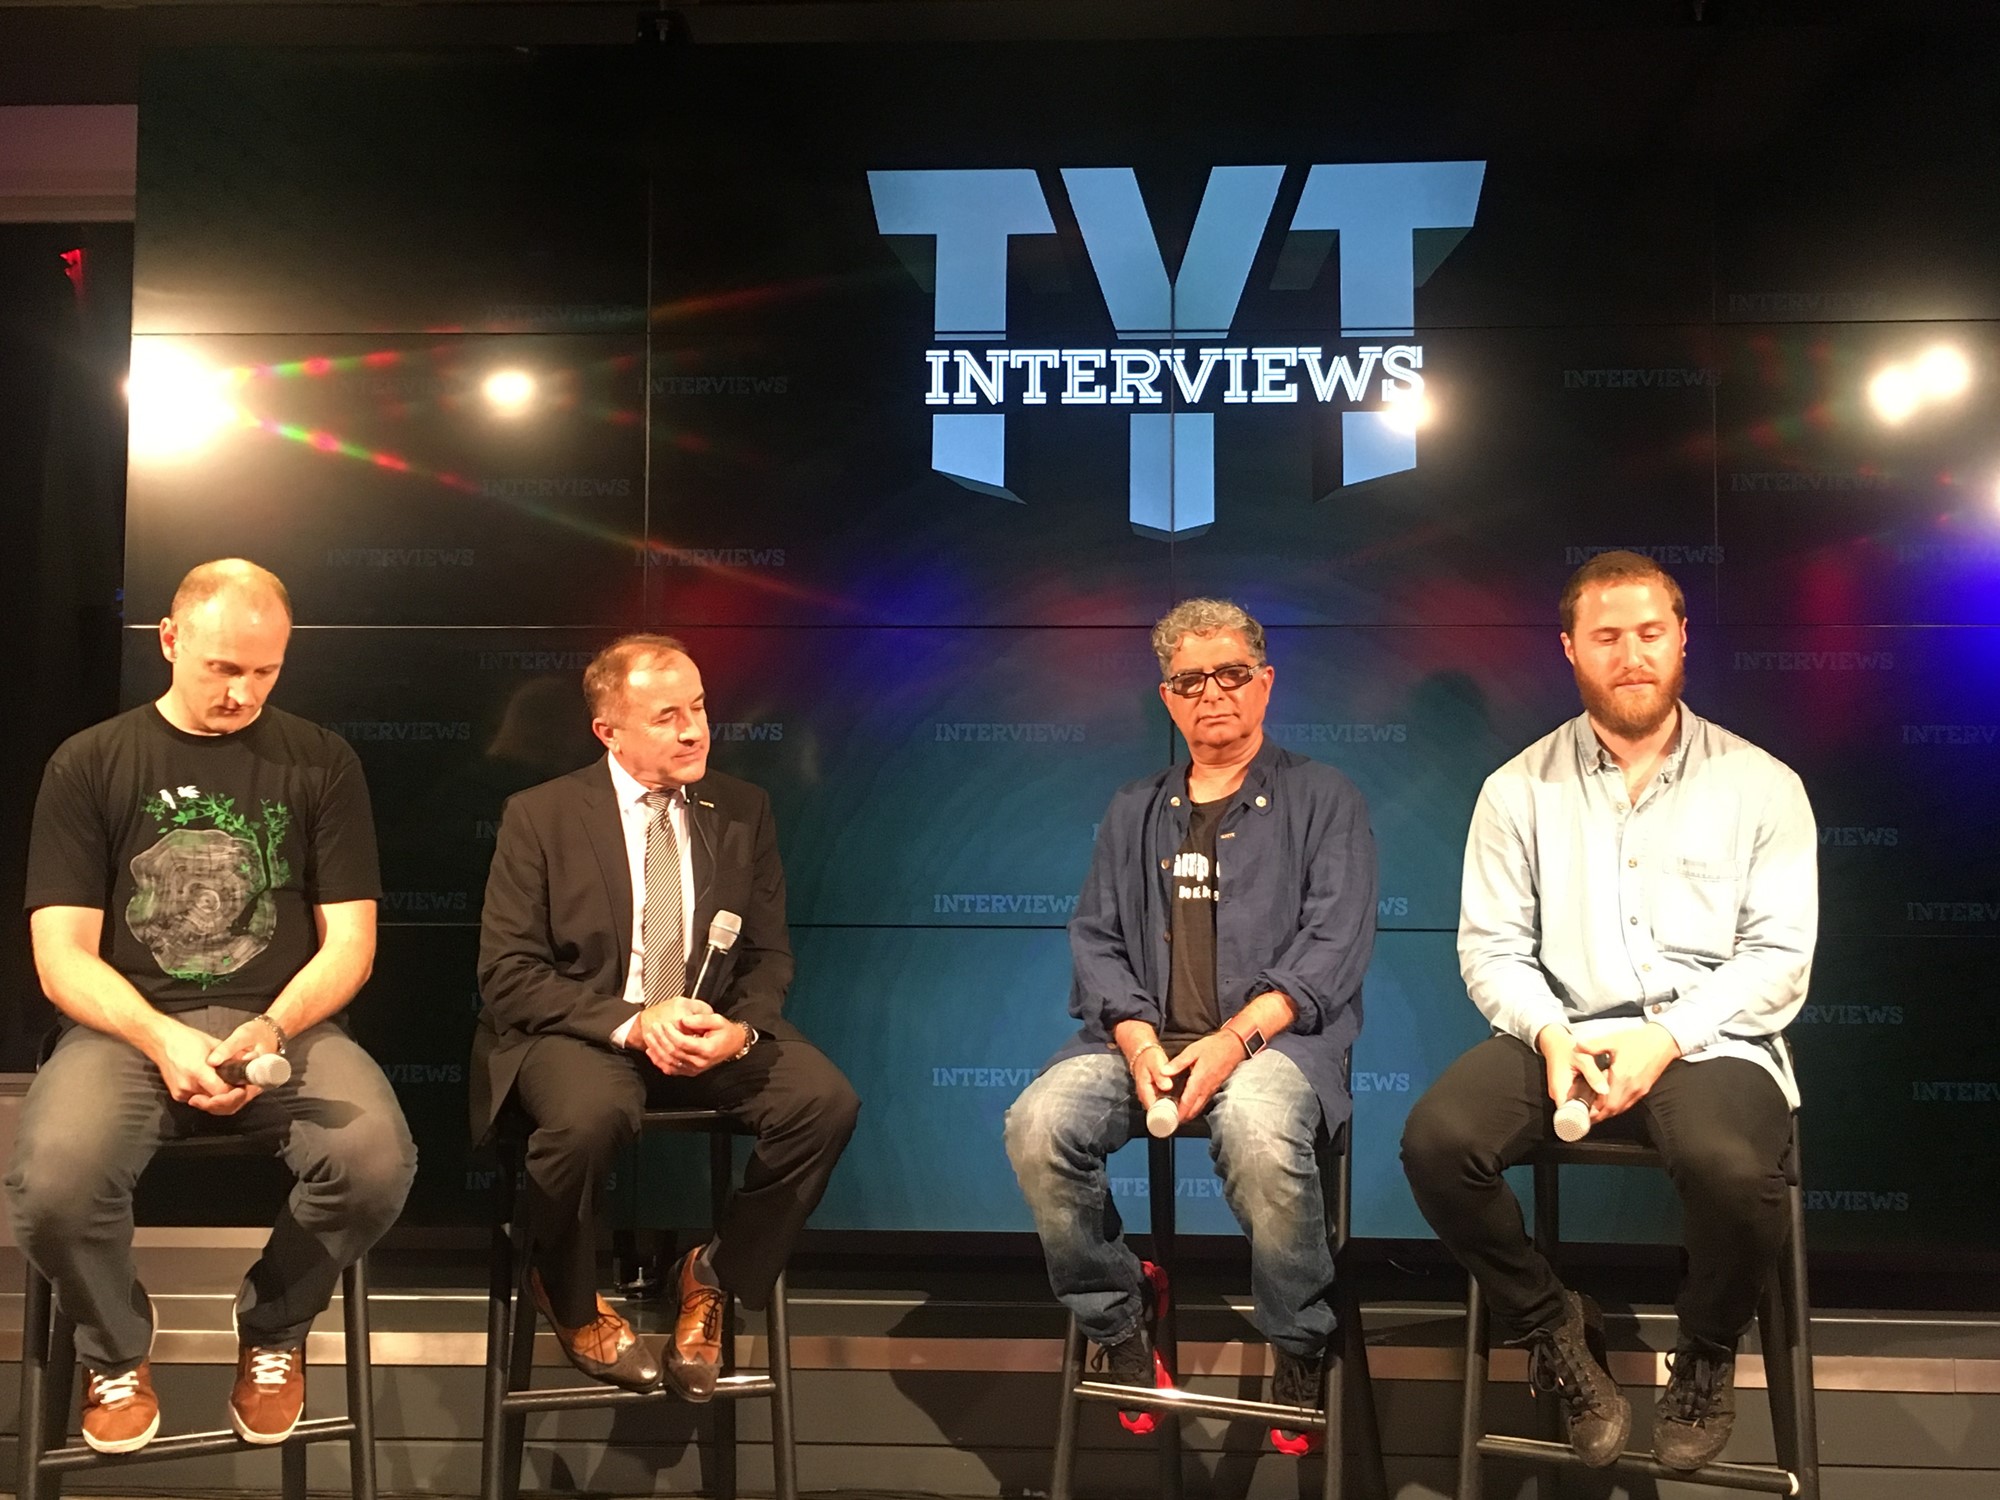 Mike Posner, Baba Brinkman, Deepak Chopra, Dr. Michael Shermer on The Young Turks with Jayde Lovell